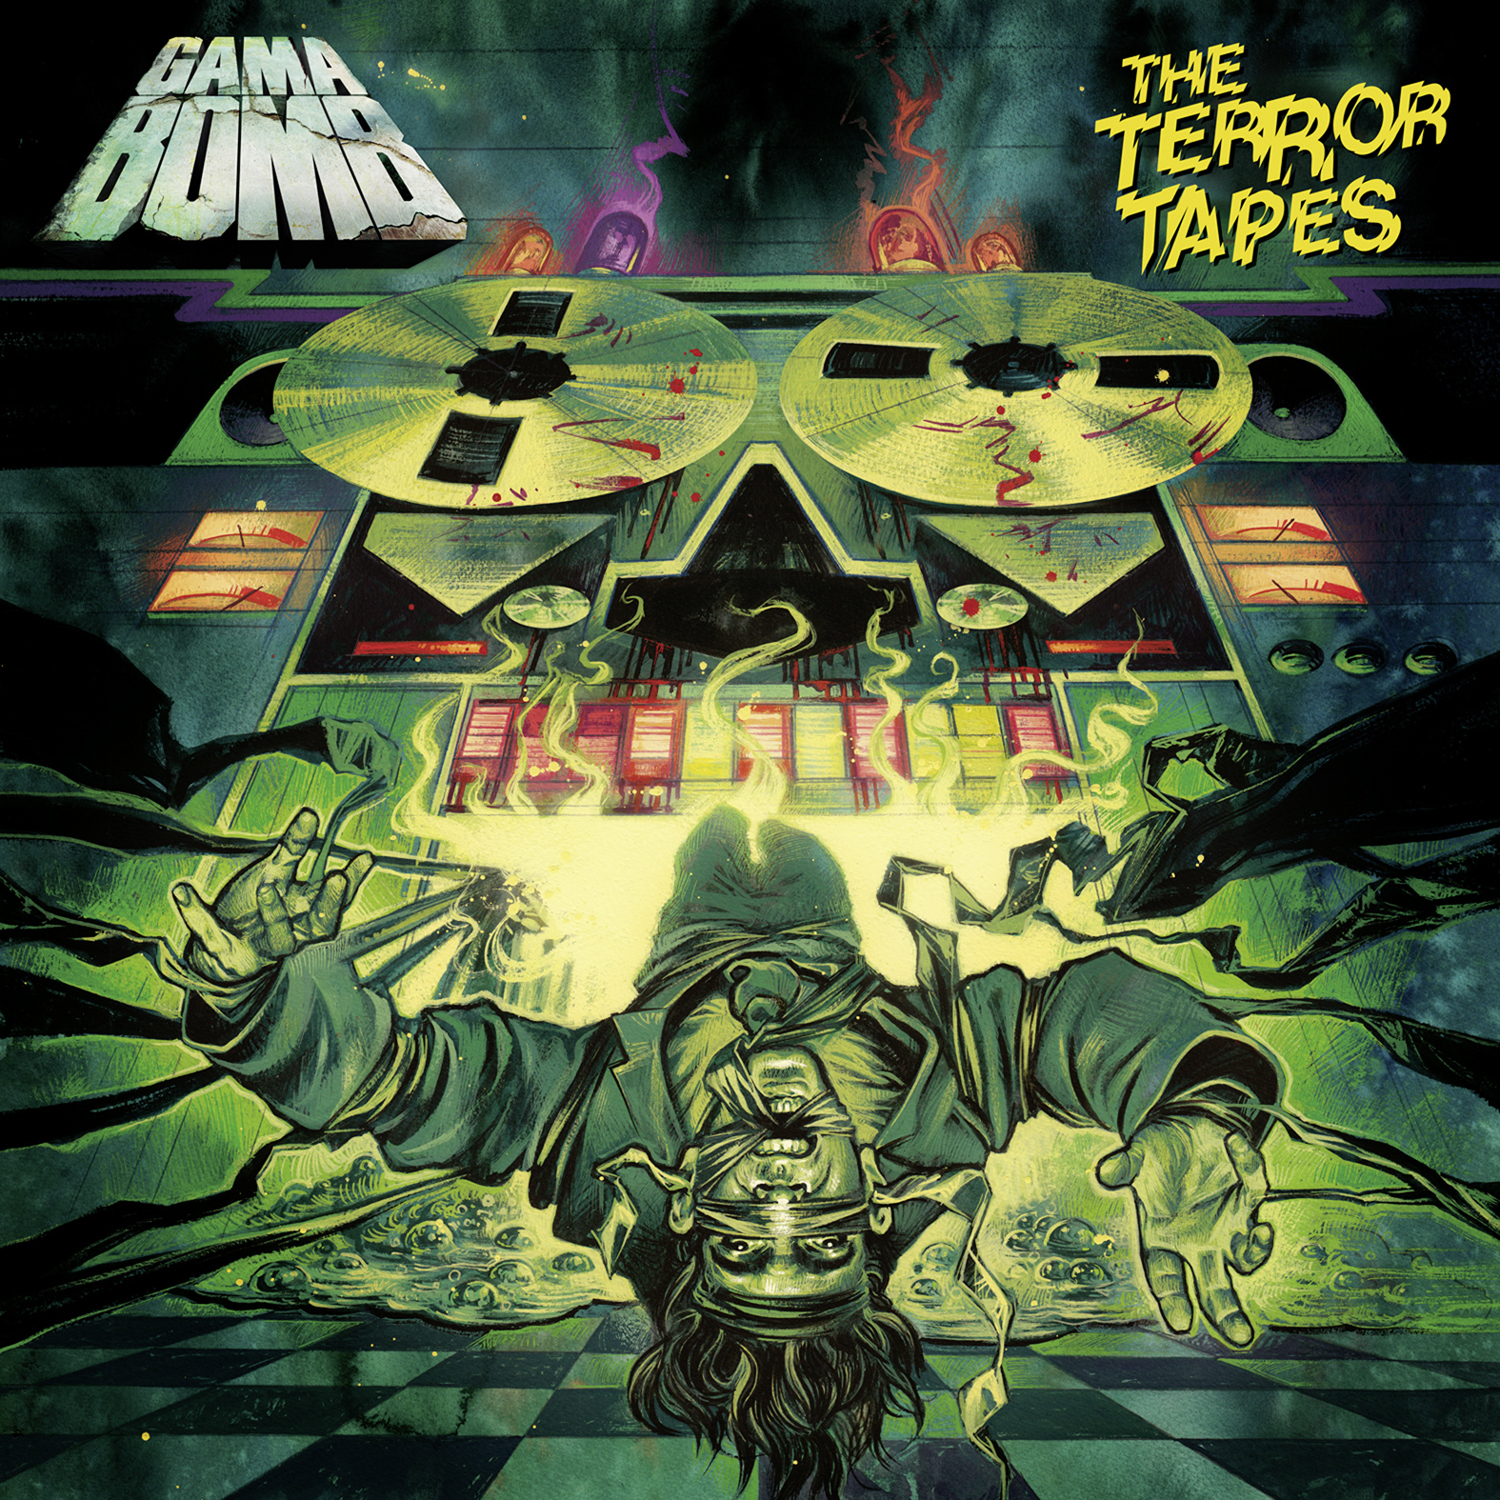 Gama Bomb - The Terror Tapes cover art